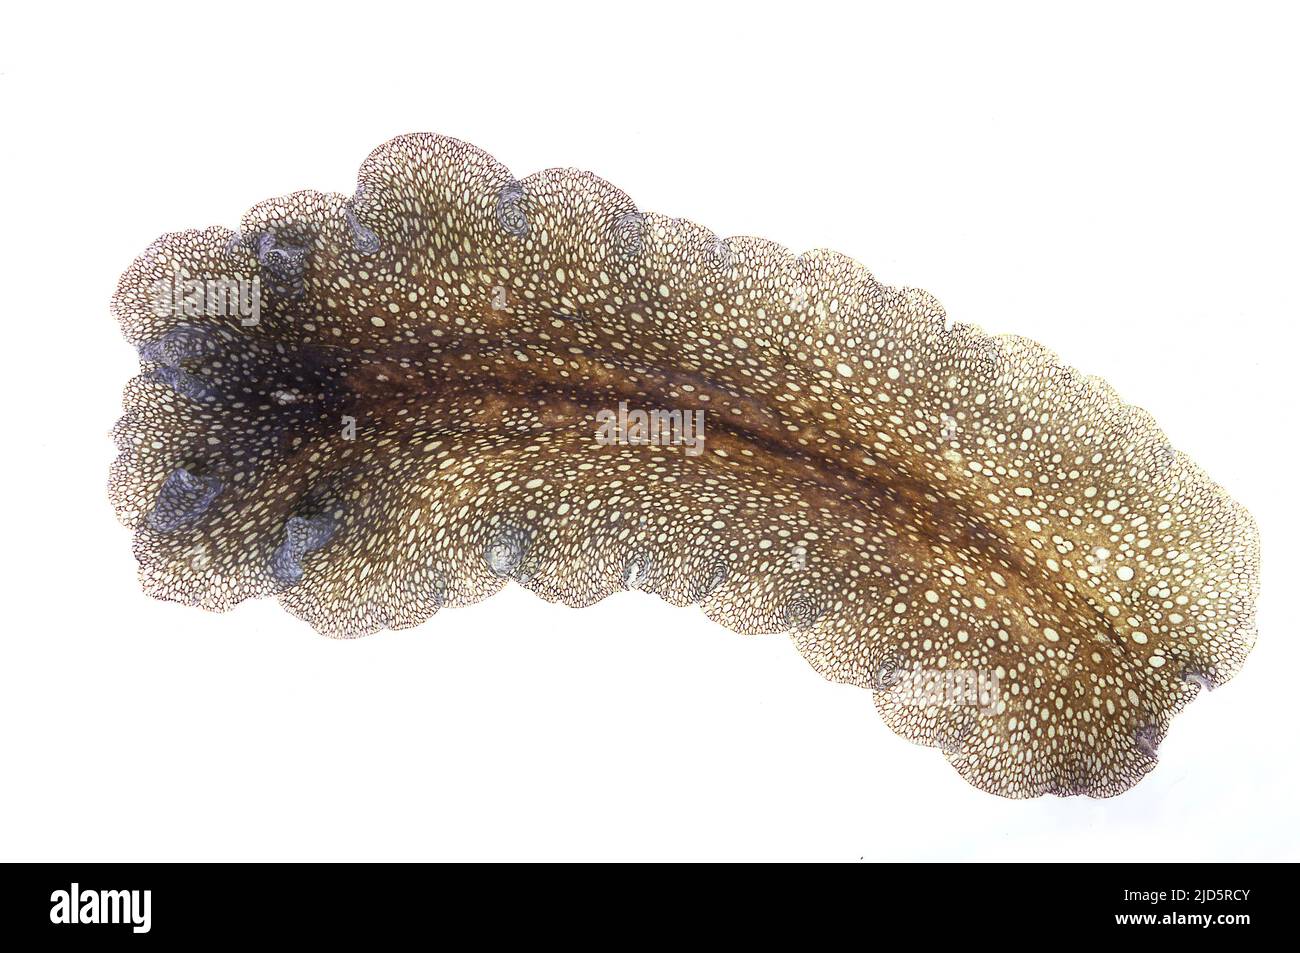 Tropical marine flat worm from the genus Pericelis. Dorsal view. Stock Photo